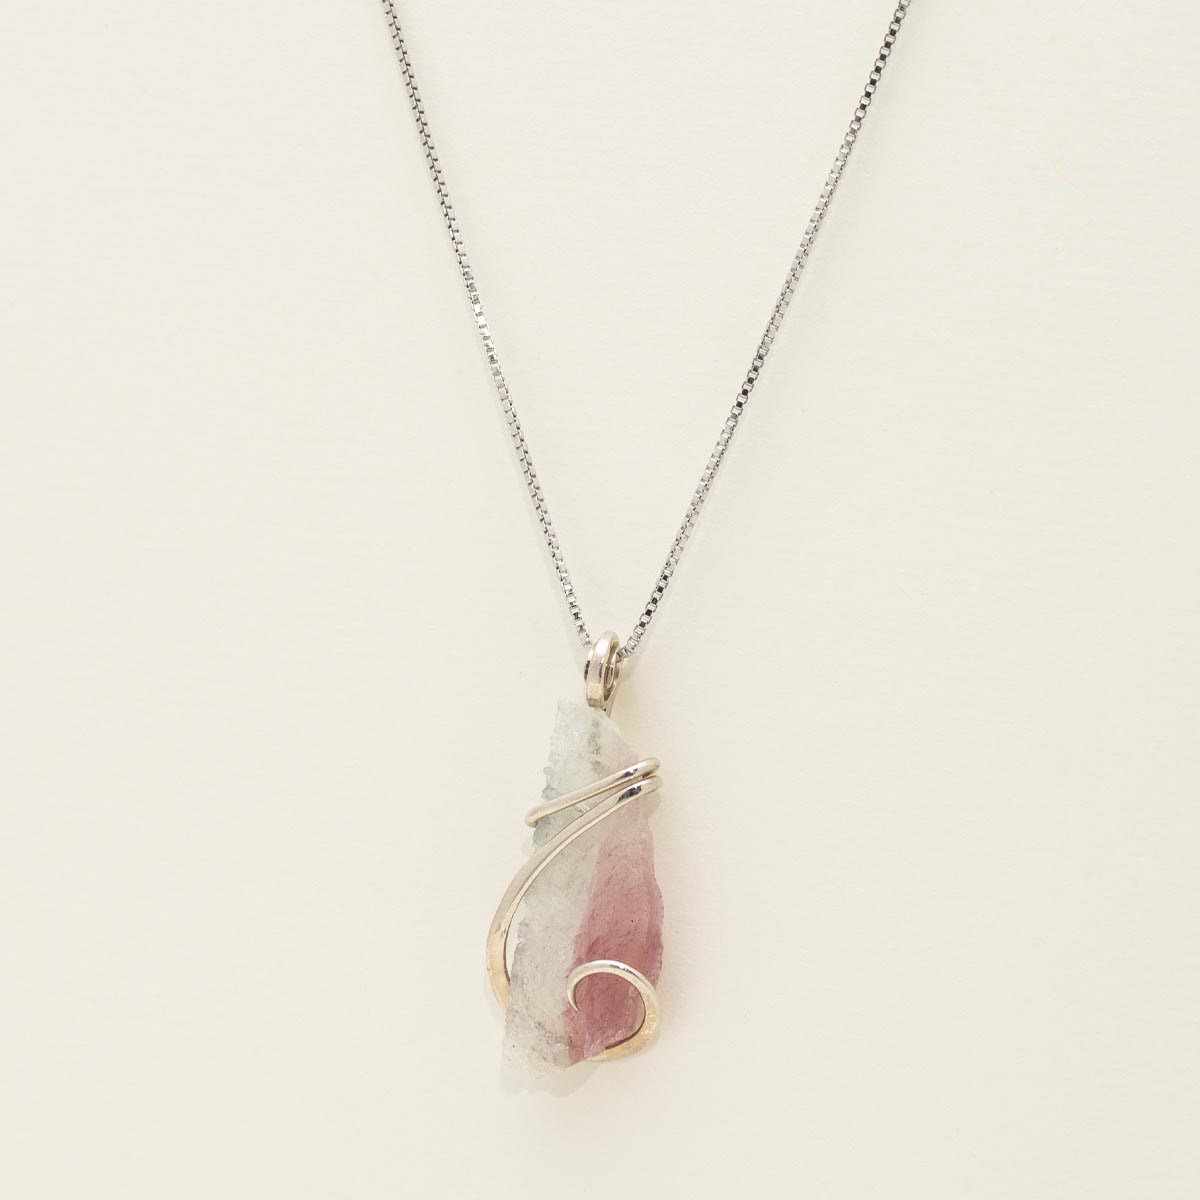 Maine Bicolor Tourmaline Necklace in Sterling Silver